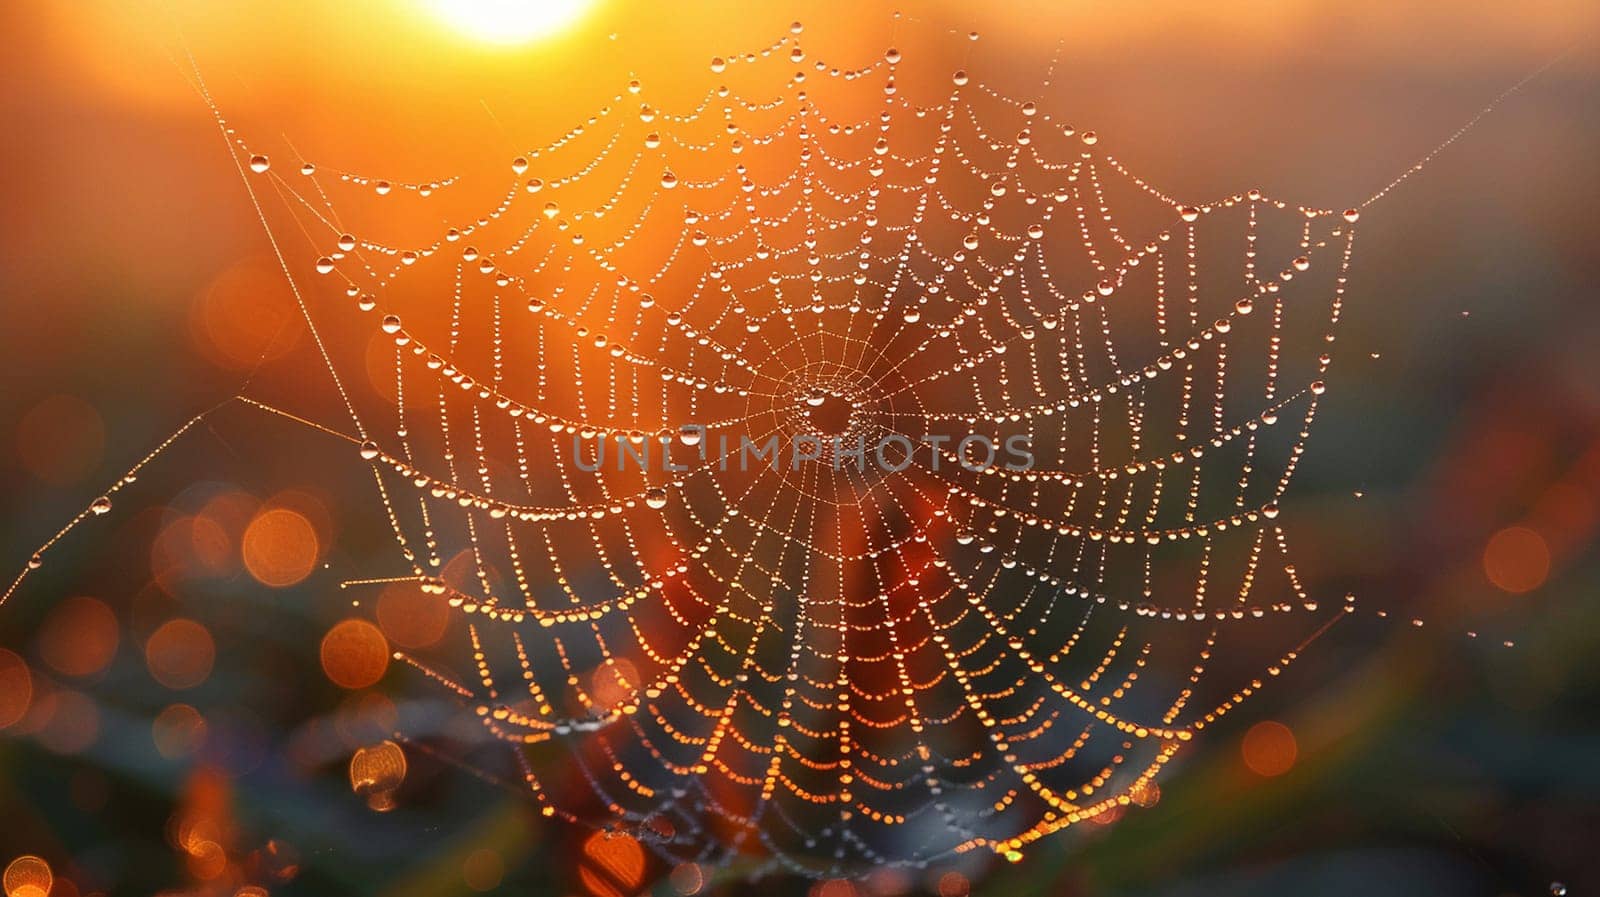 The intricate pattern of a spiders web at dawn by Benzoix